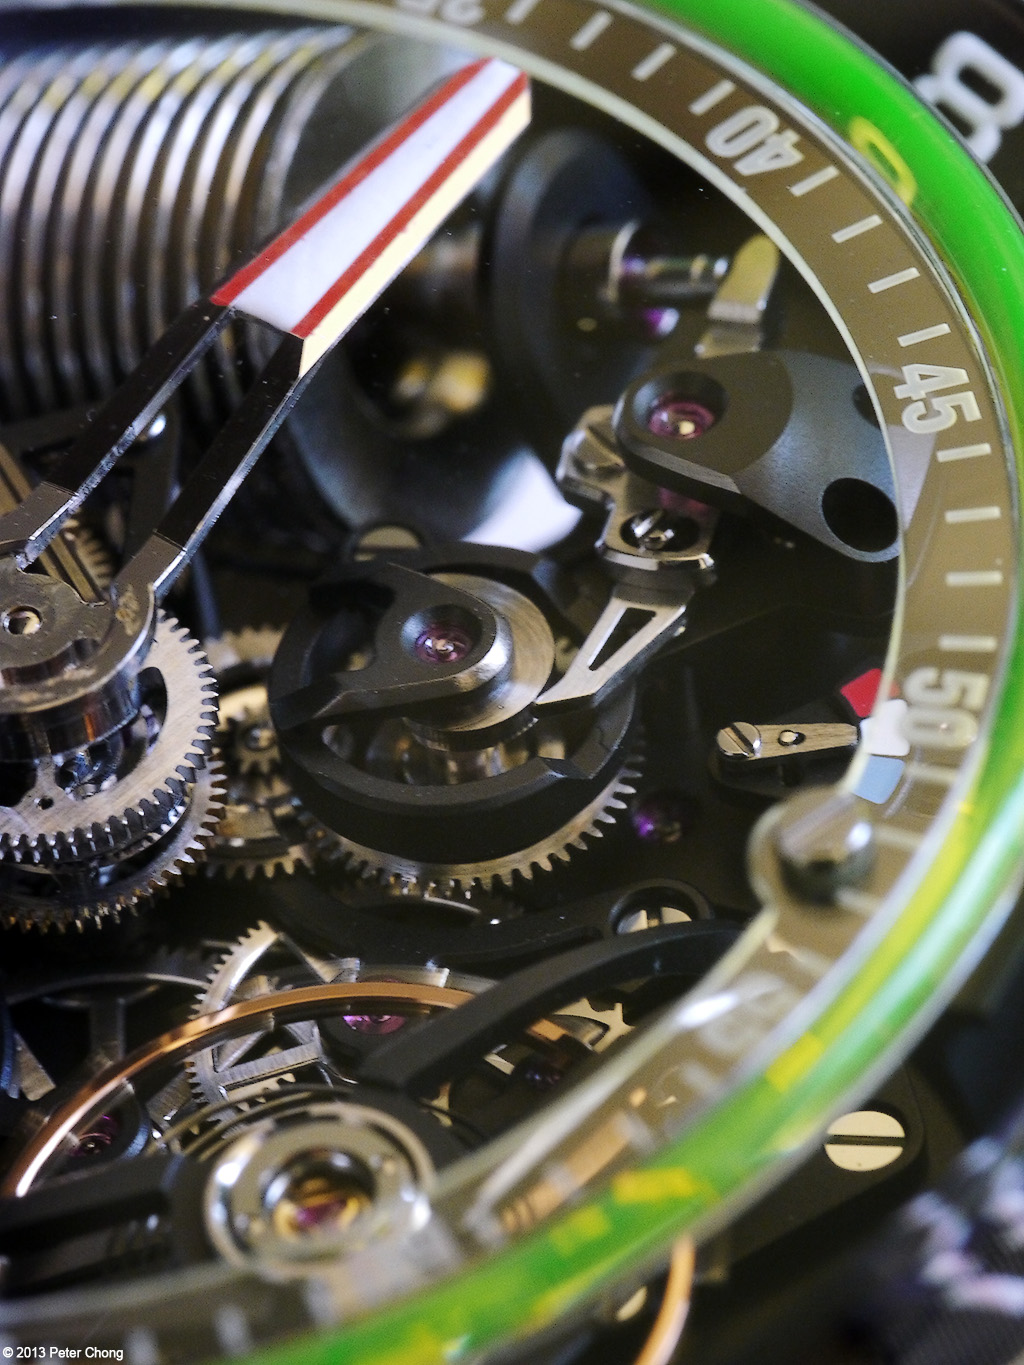 The H2 as well as the H1's mechanical parts are designed, and finished to traditional watchmaking standards.